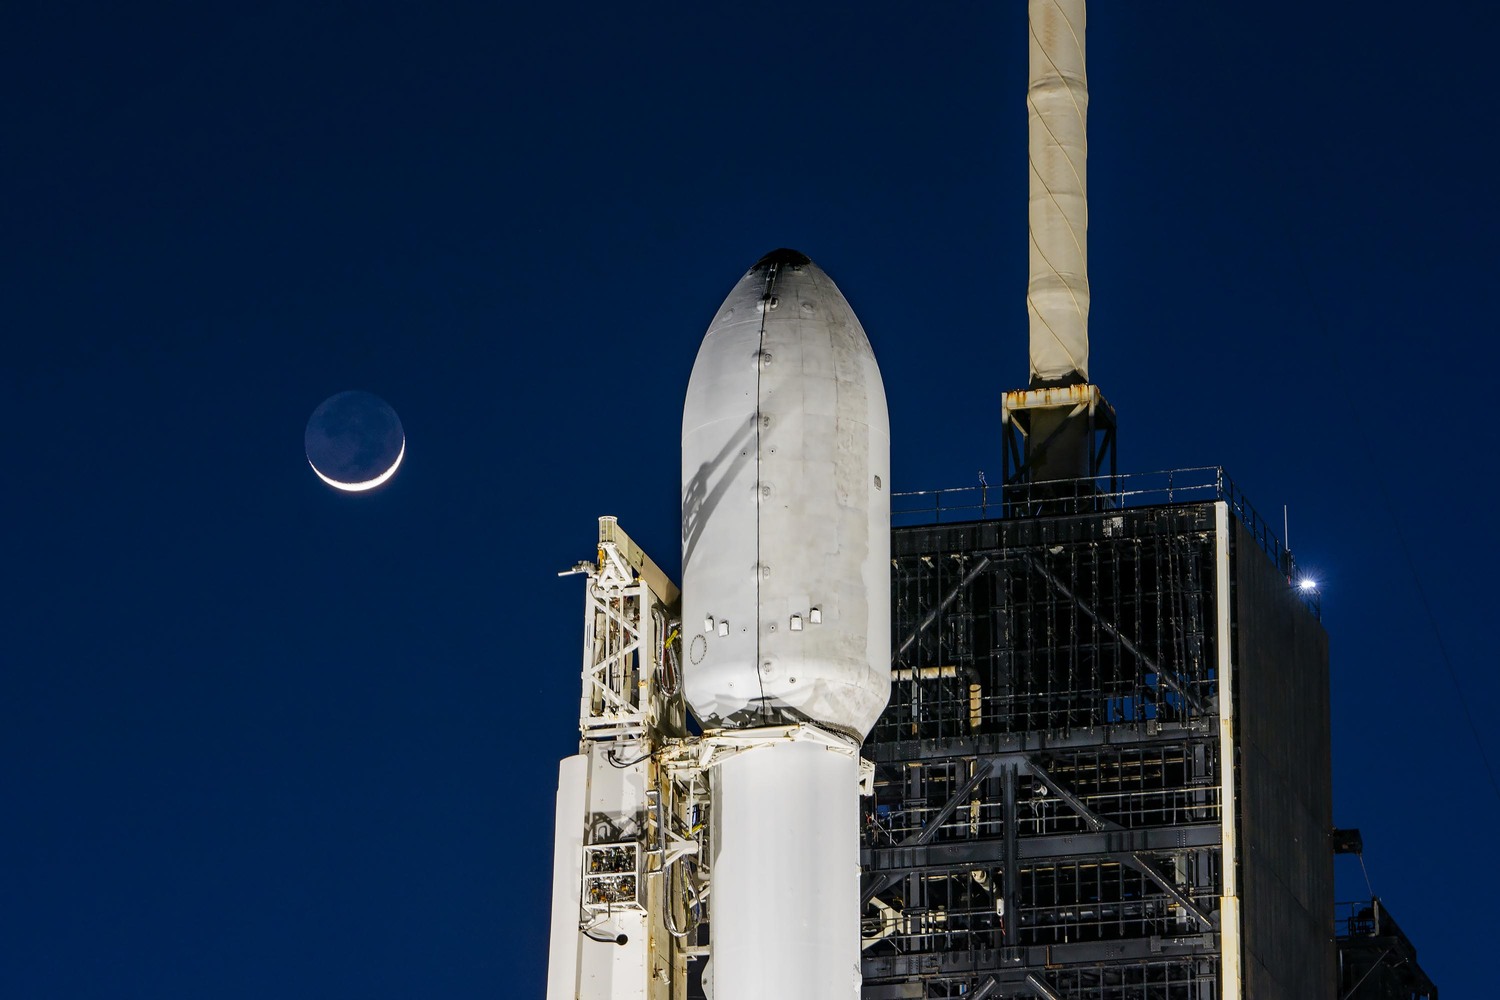 intuitive-machines-lunar-lander-en-route-to-the-moon-after-spacex-launch